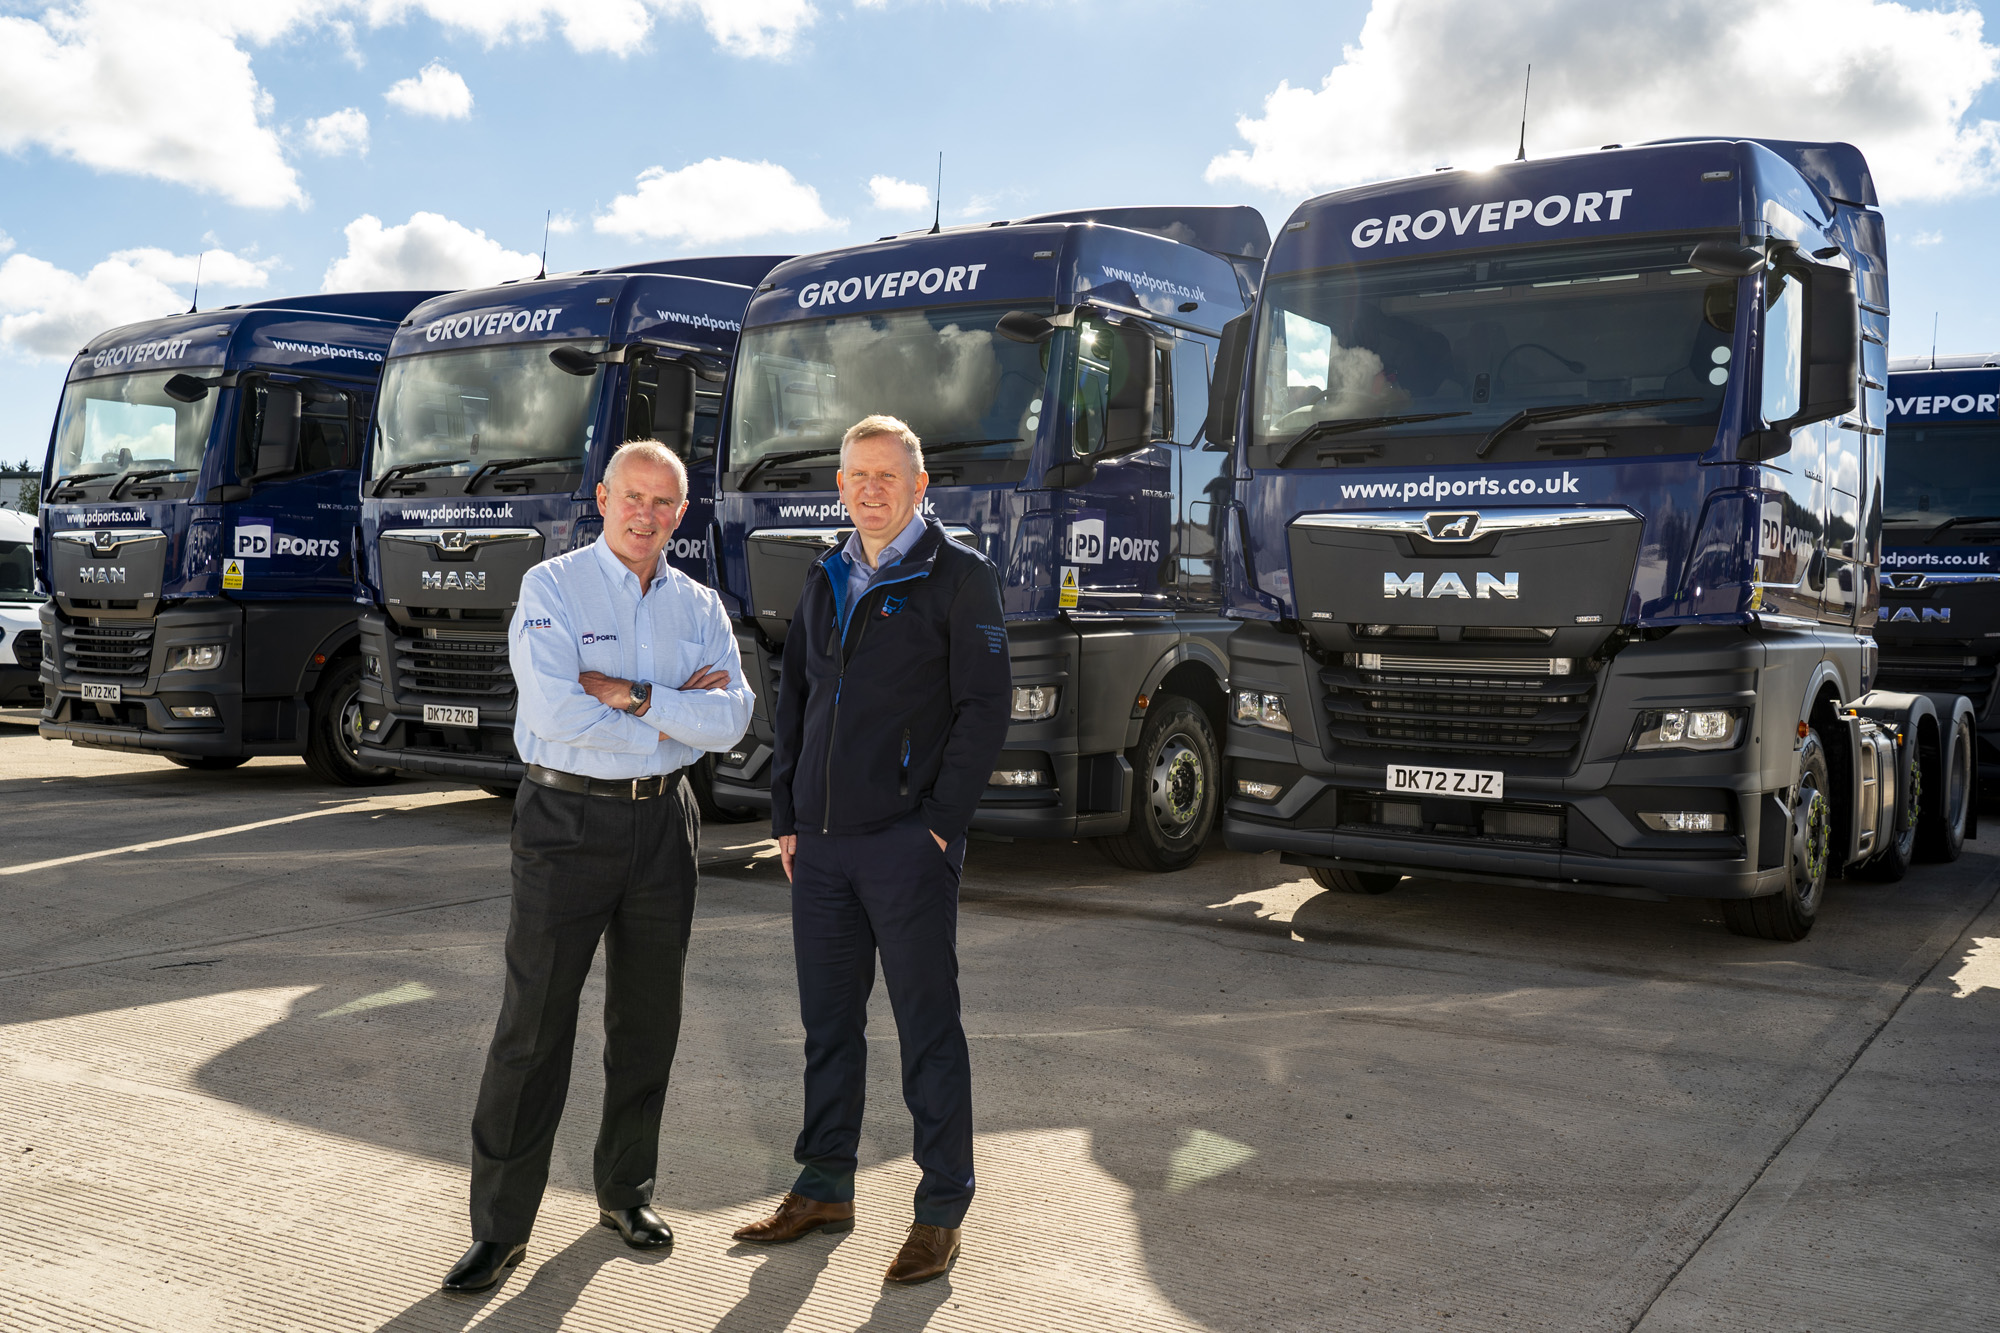 PD Ports - Gary Archer and Nigel Holmes standing in front of trucks